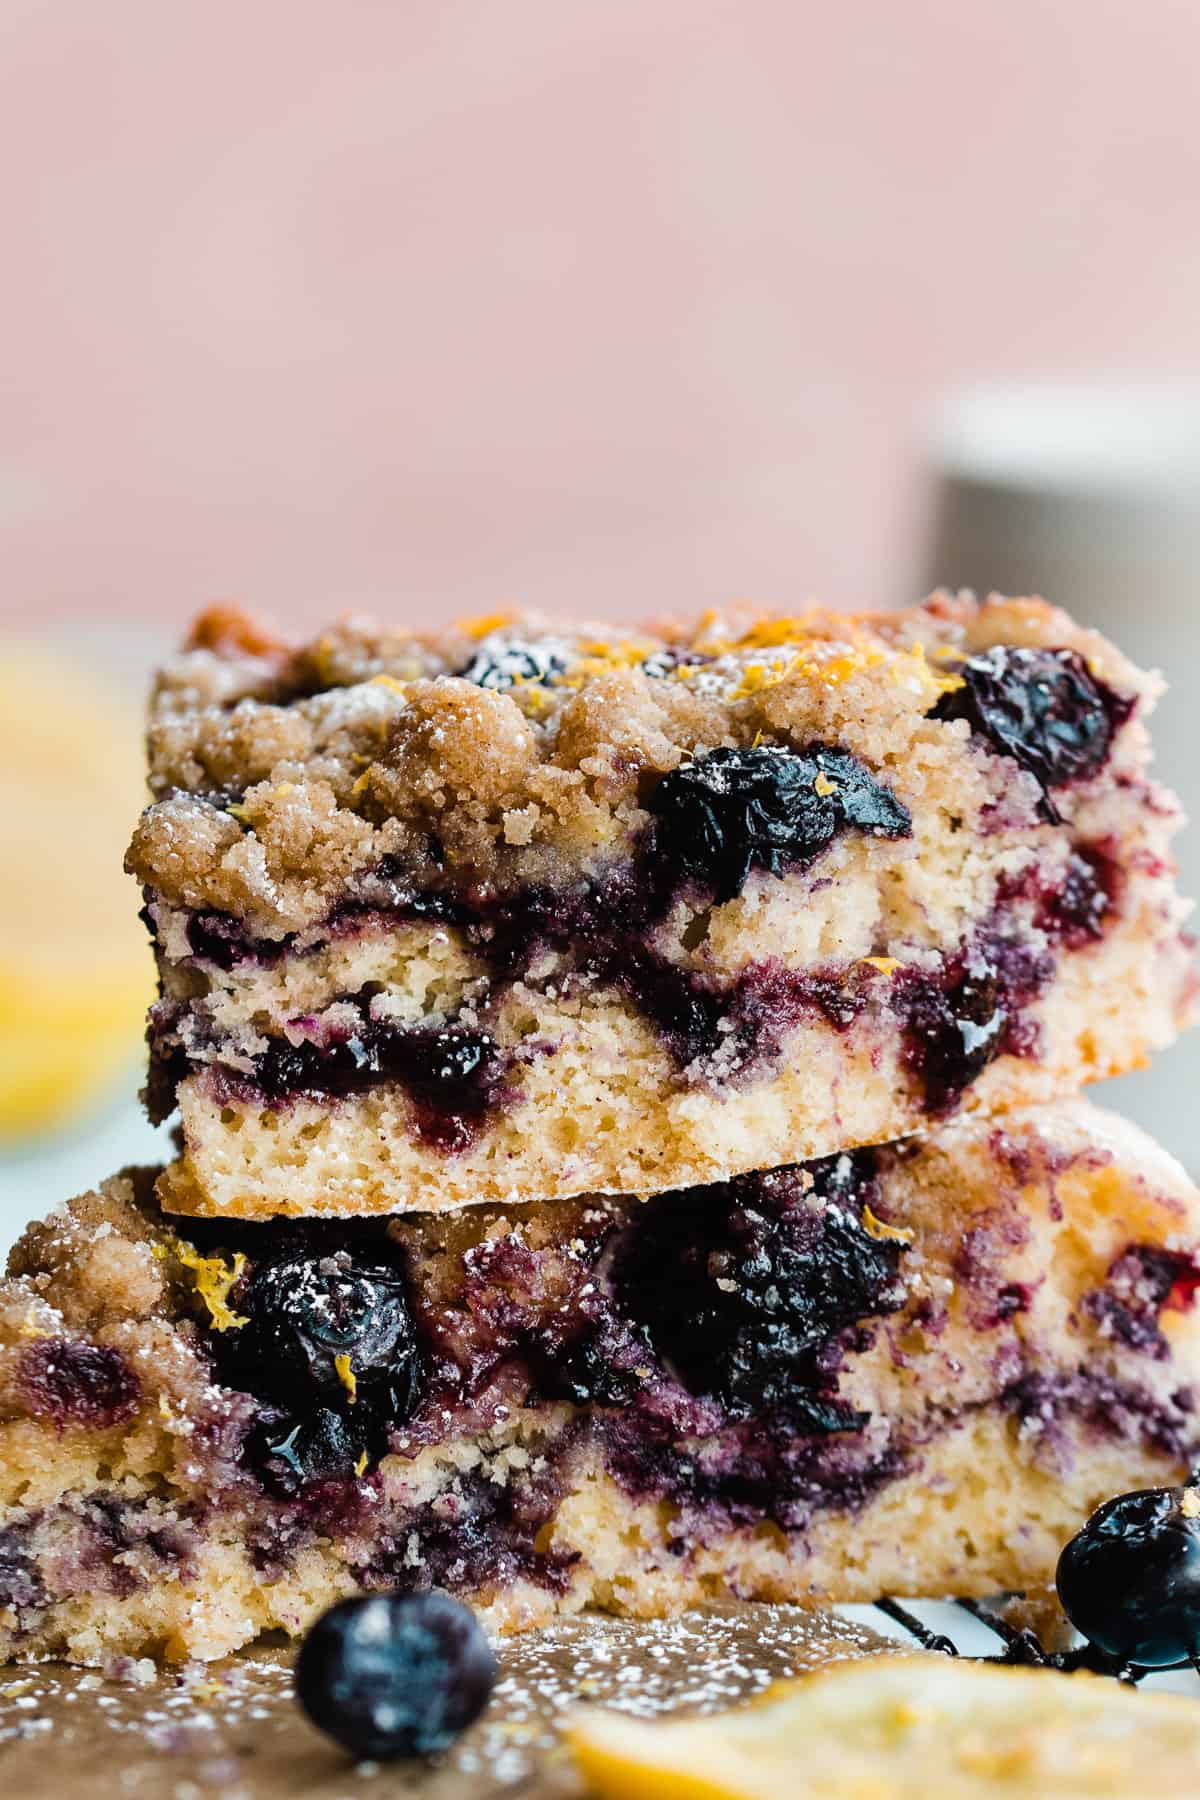 A stack of blueberry lemon coffee cake slices with blueberries and a blueberry jam ripple.